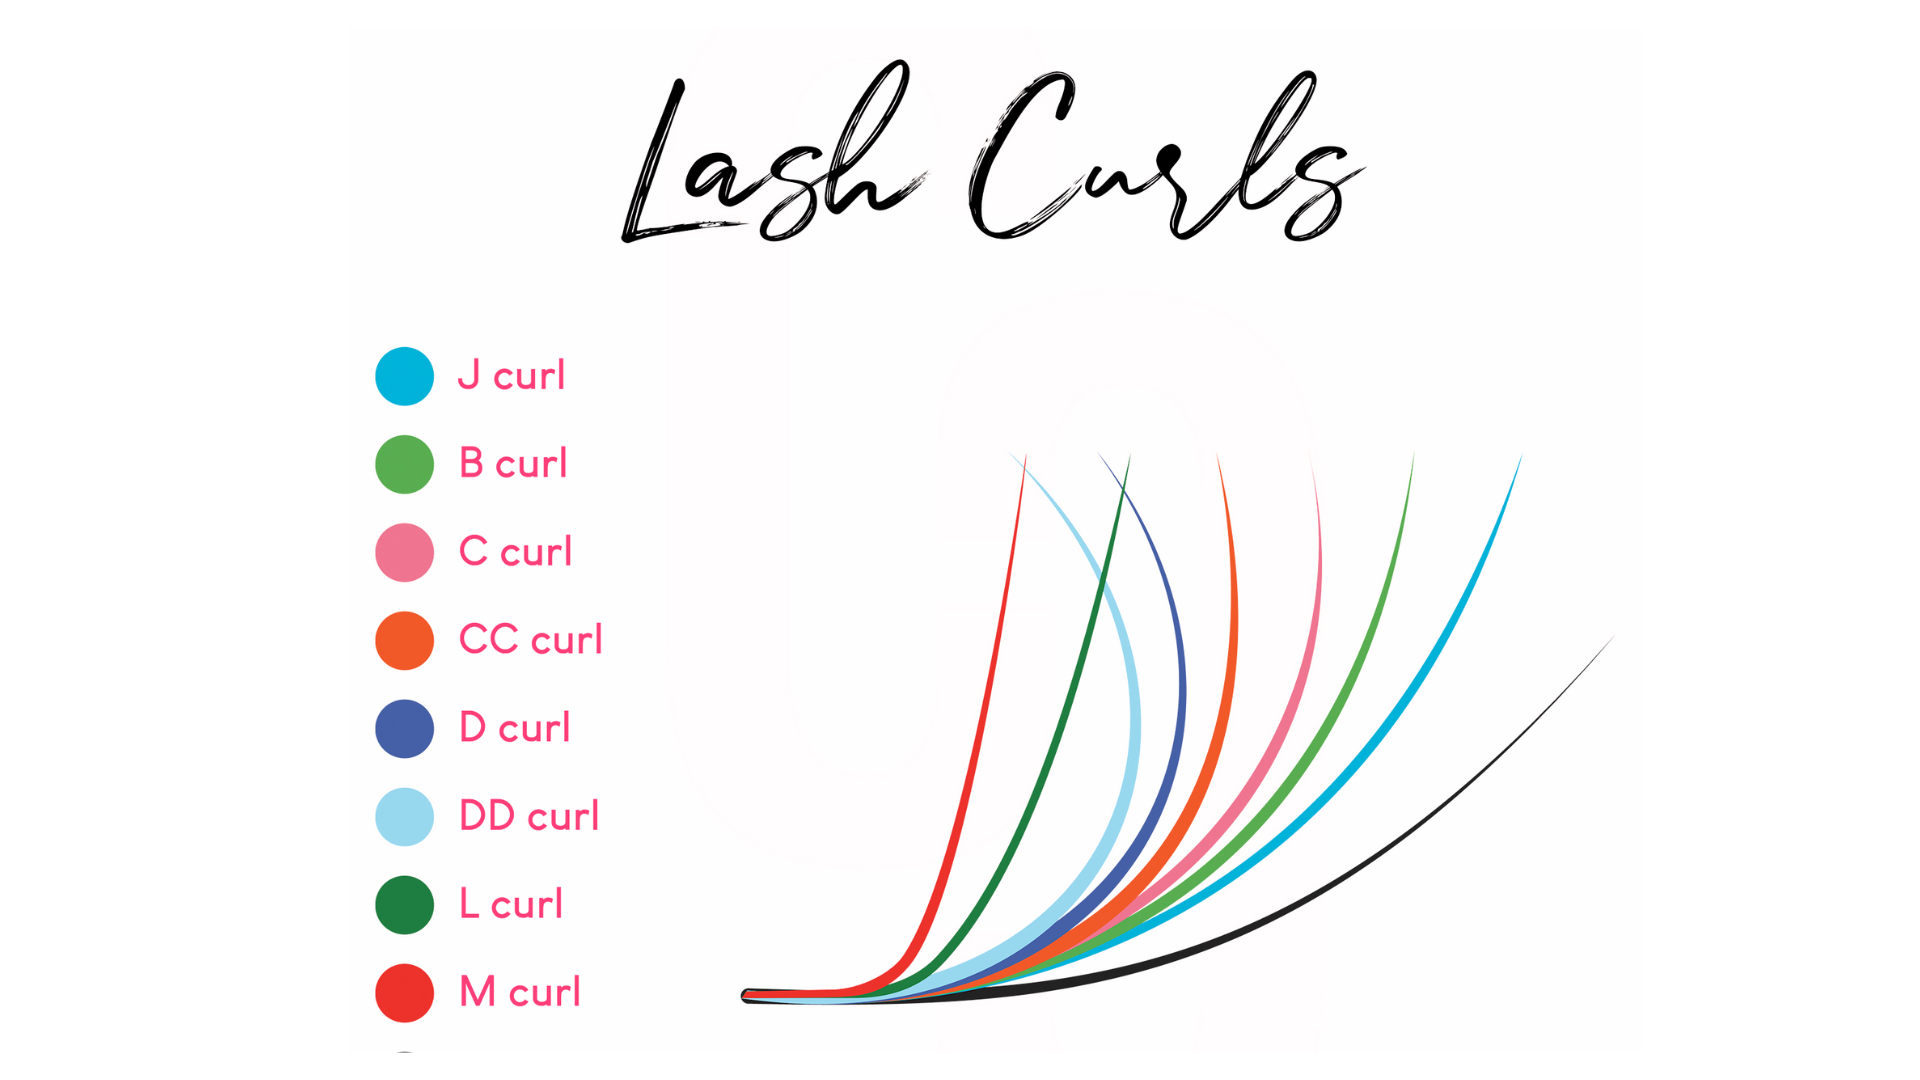 From J to M, which lash curl is suitable for you?